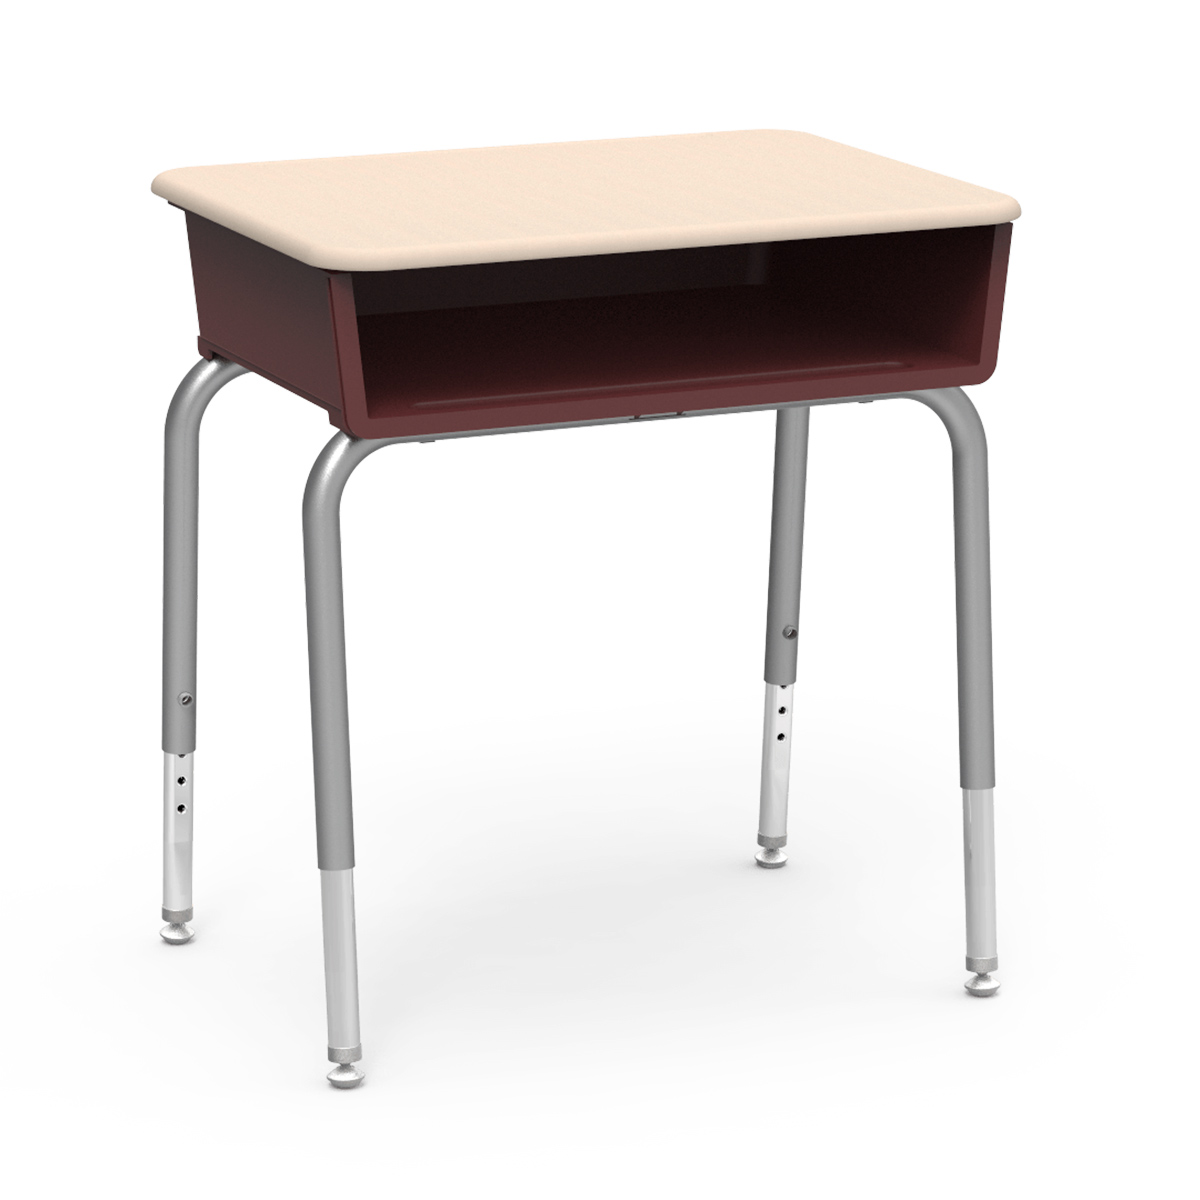 Virco 785 Series Student Desk with Hard Plastic Surface and Plastic Book Box